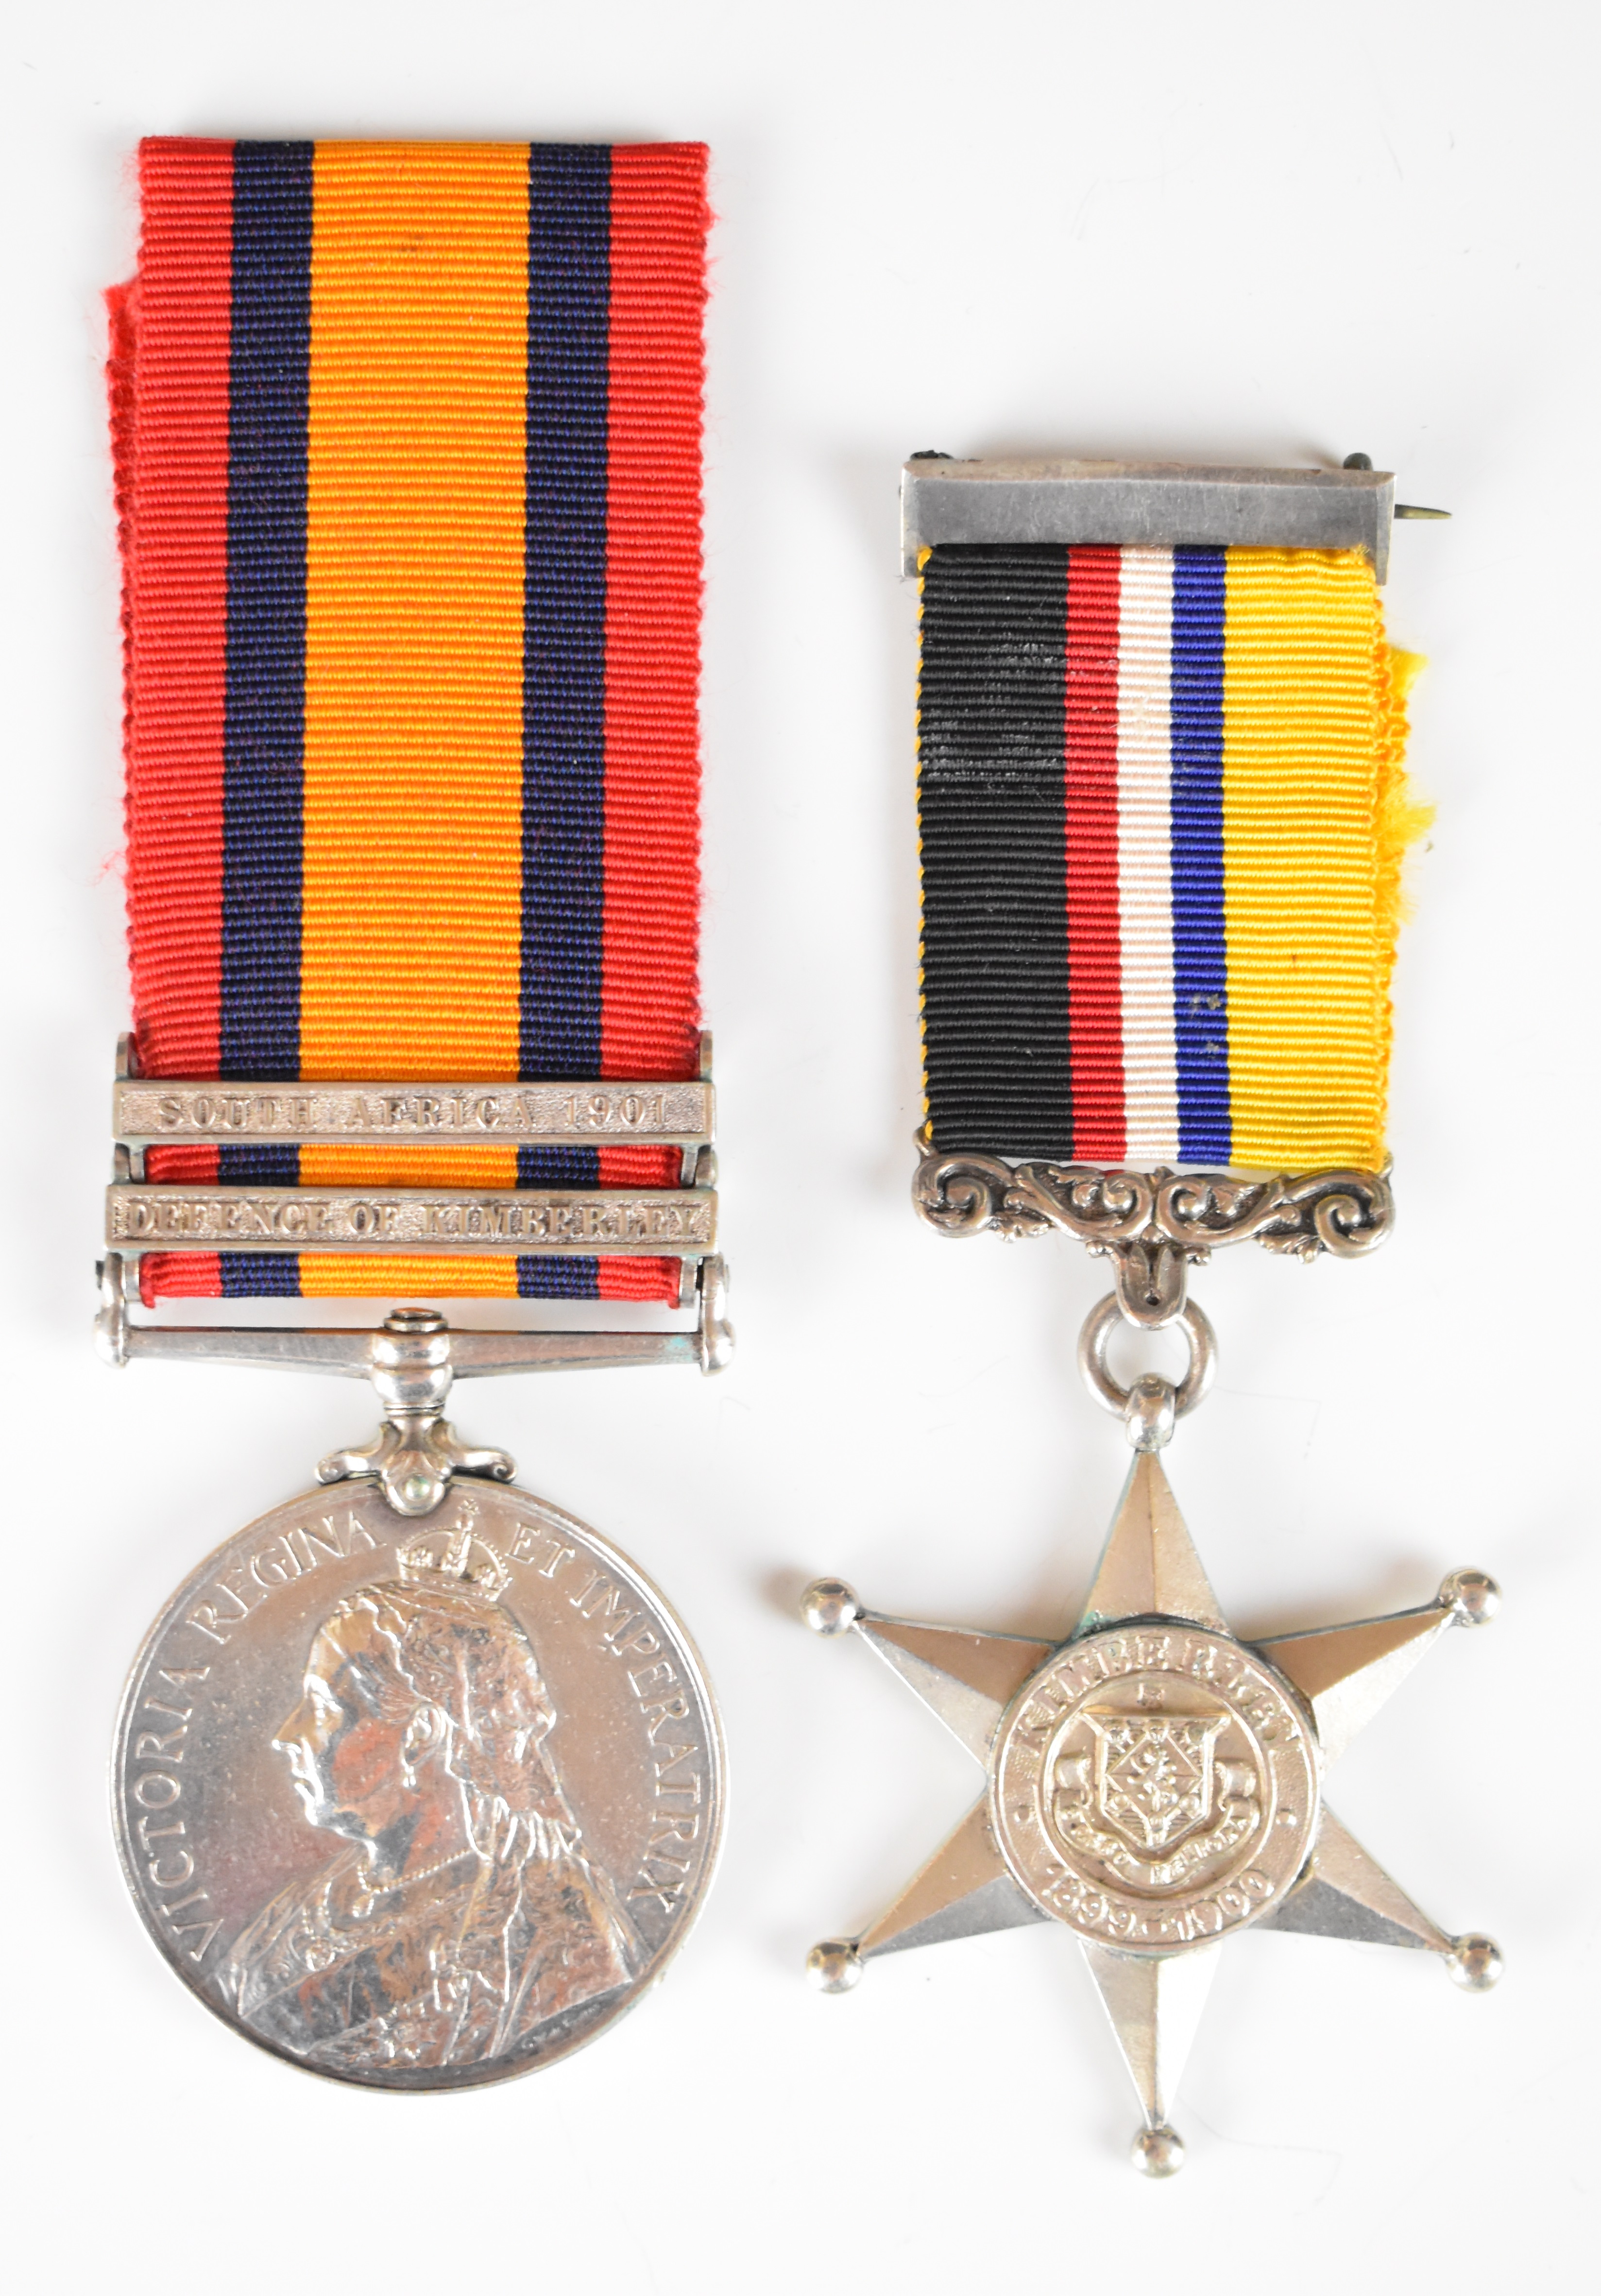 Queen's South Africa Medal with clasps for Defence of Kimberley and South Africa 1901 named to 828 - Image 12 of 22